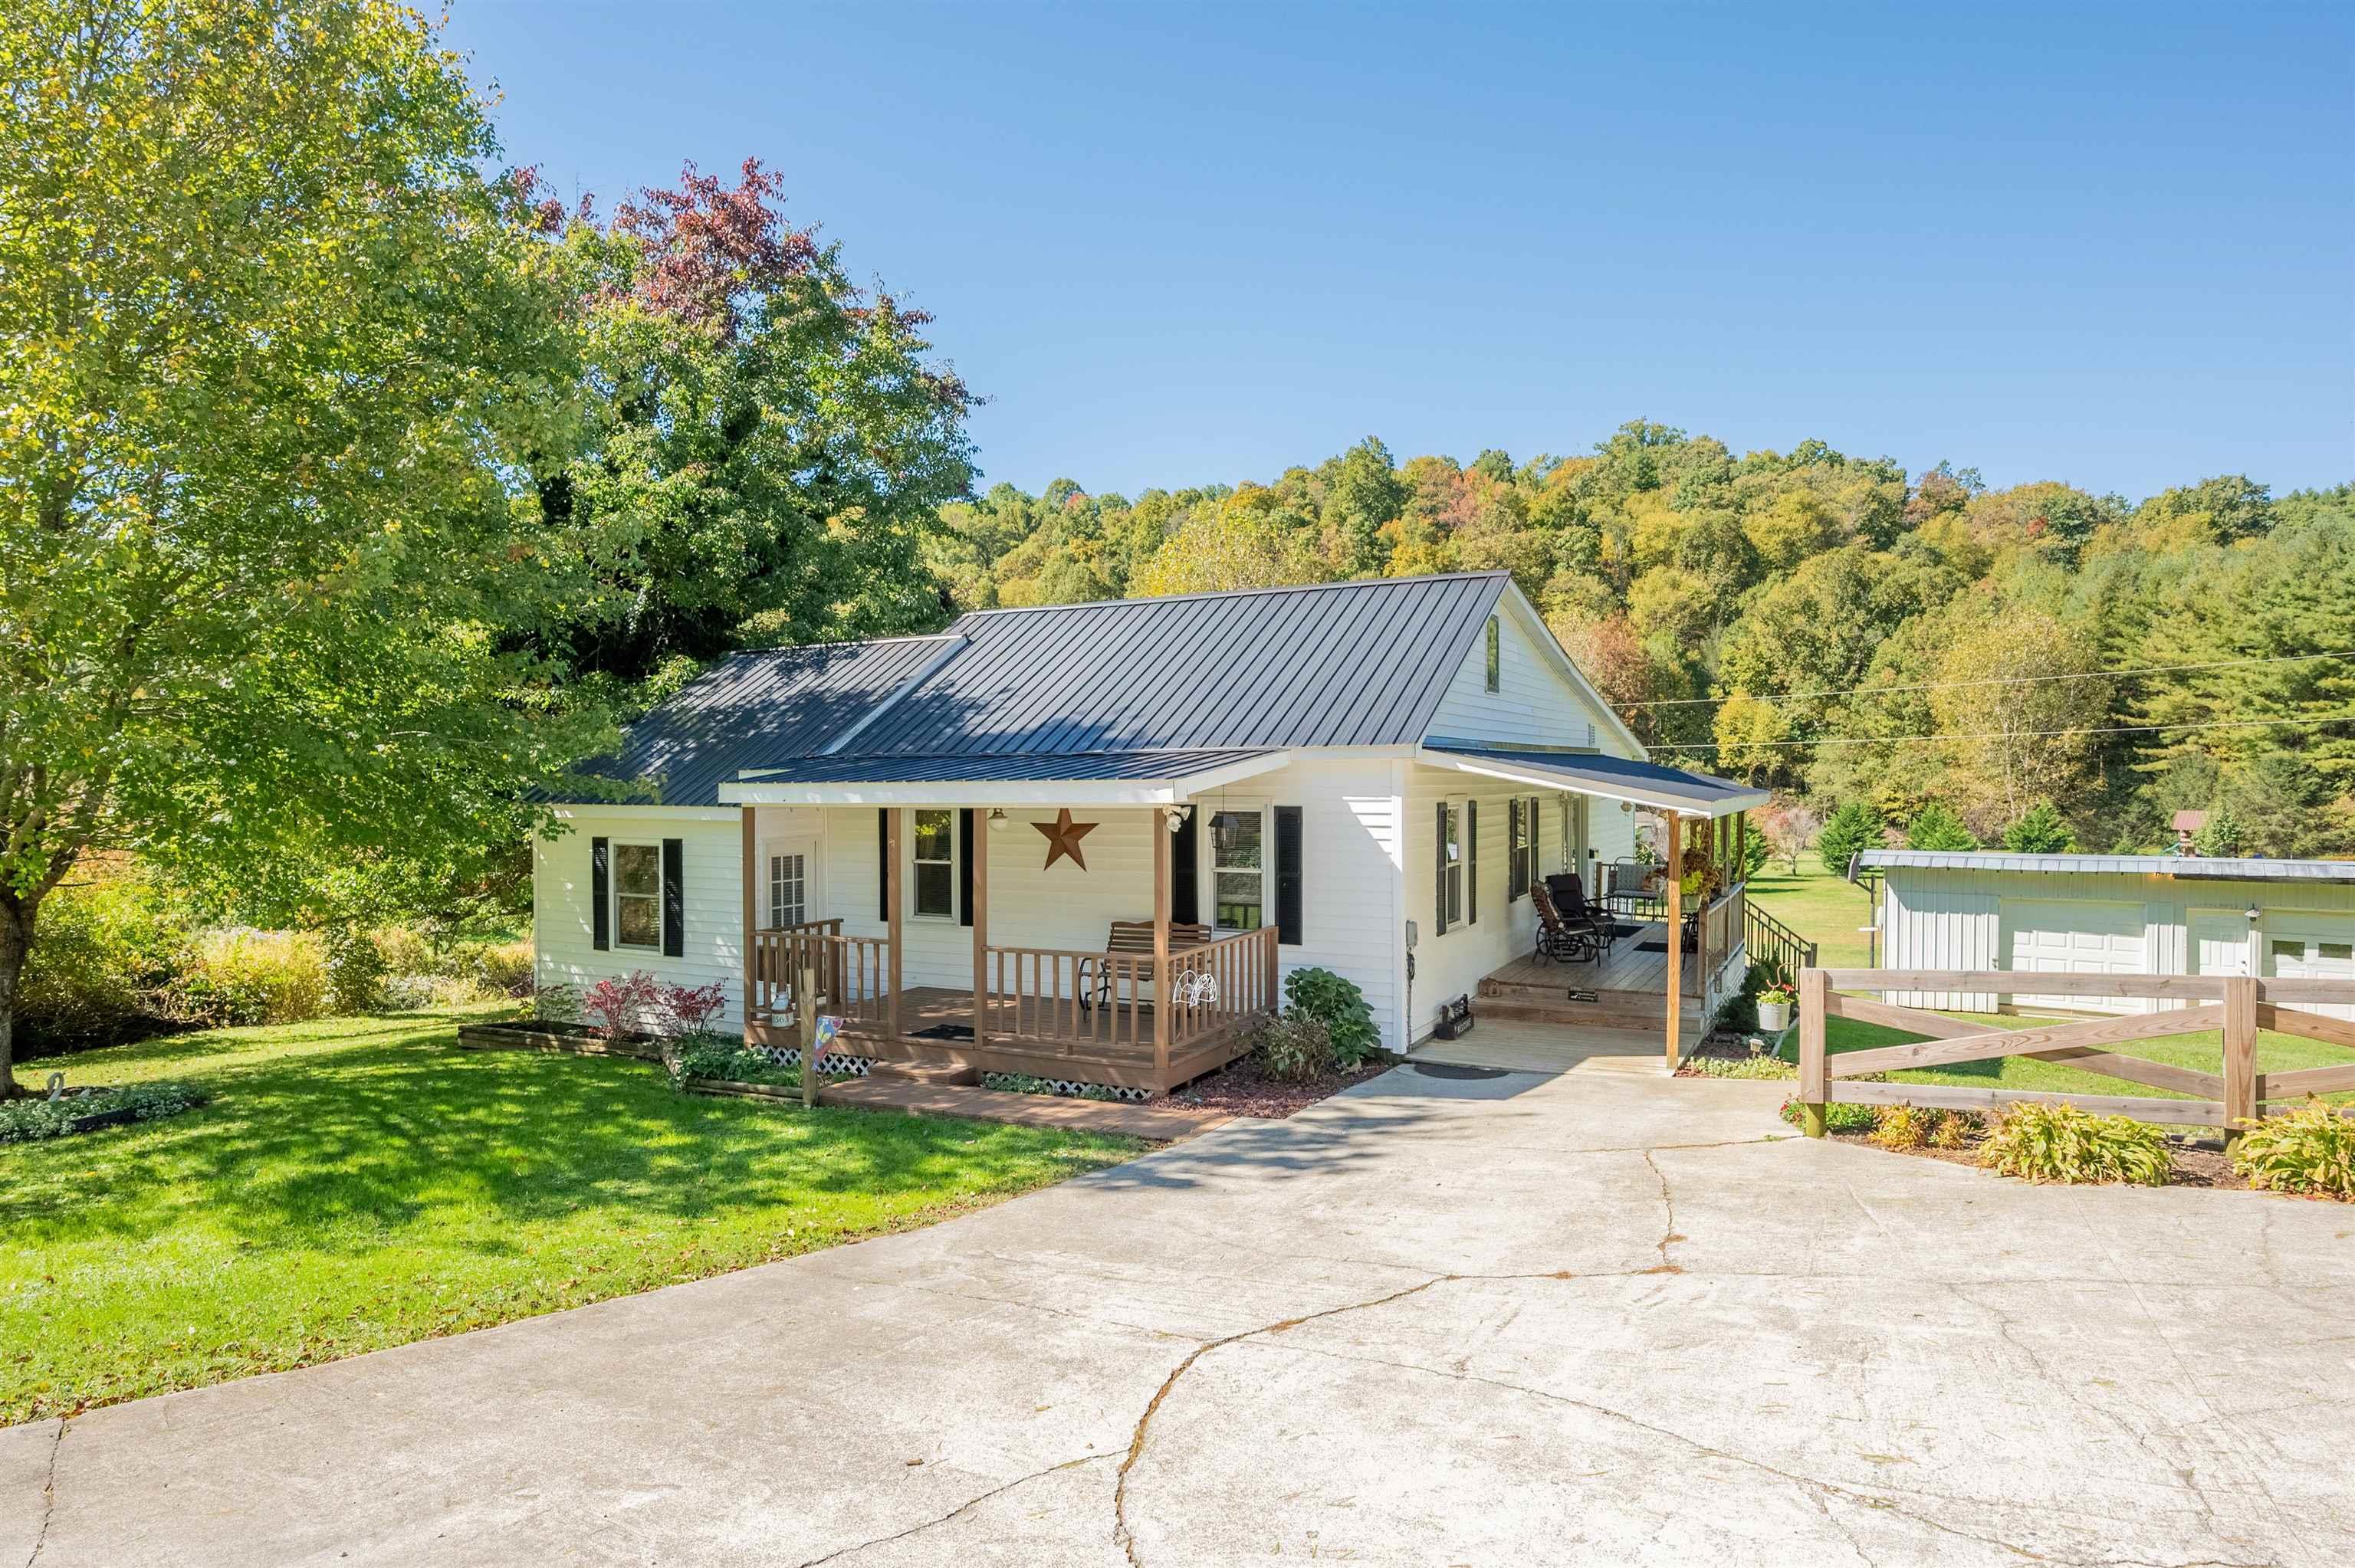 Charming country home in beautiful Floyd County.  This lovingly maintained home on 2+ acres is ready to be your mini farm.  Cozy with plenty of room for the family inside and out!  The 3 bay garage has room for a workshop and plenty of storage.  The large yard is open and flat with plenty of space for a large garden beside the creek. Finished attic space with a half bath!  Citizens Fiber Available! The County GIS map is incorrect, please see the Aerial map in documents for approximate property boundaries.  Sellers to have the property surveyed prior to closing.